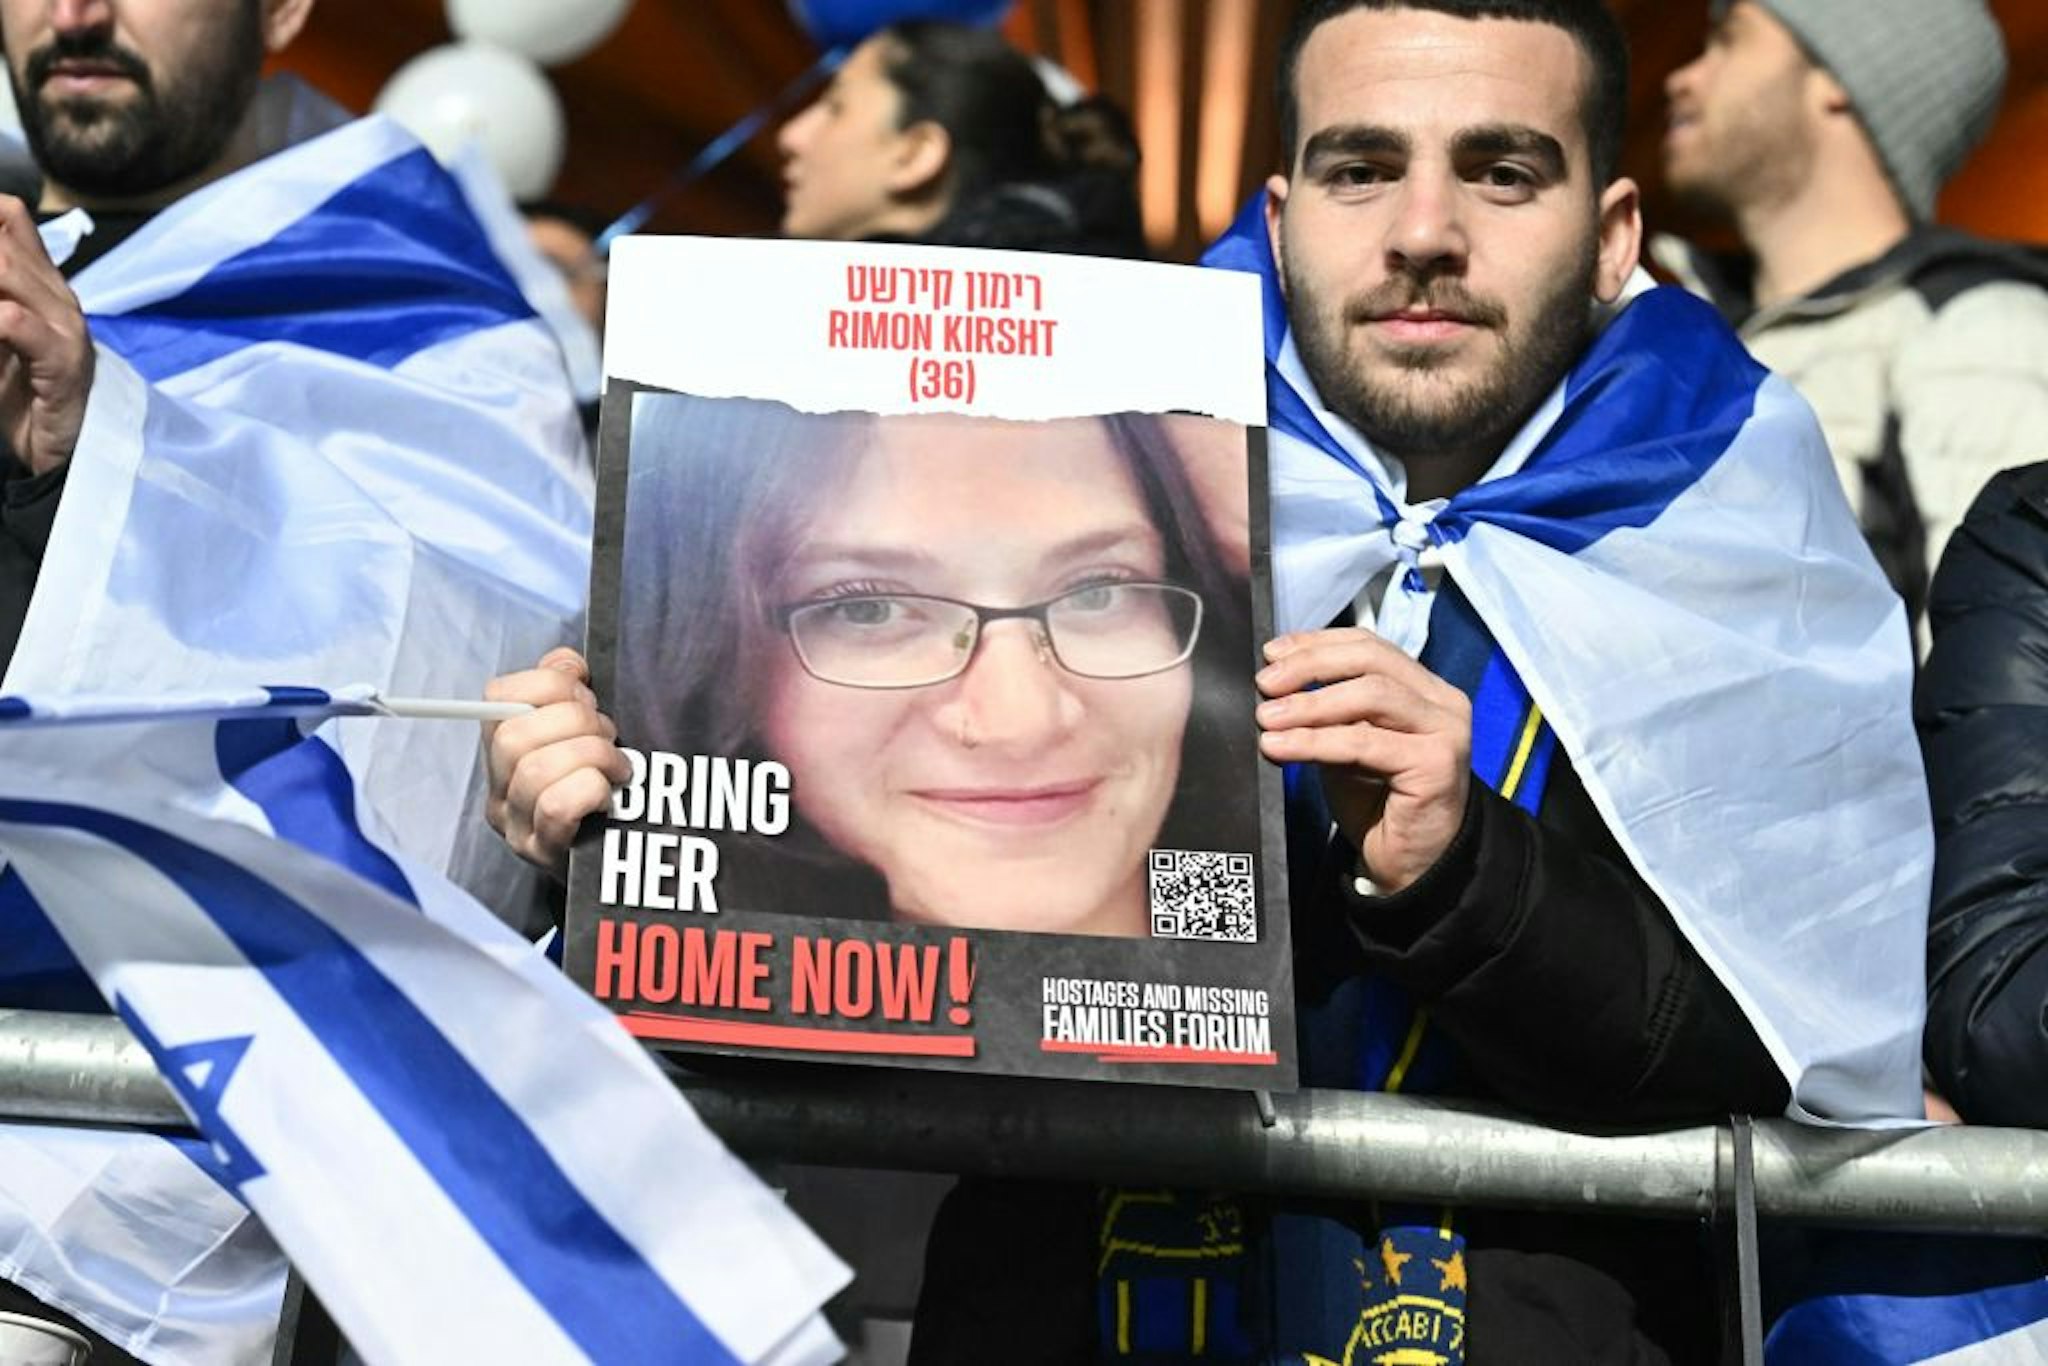 An Israel fan holds iup a placard calling for the release of Rimon Kirsht, one of the hostages held by Palestinian militants since the October 7 attack, prior to the UEFA Euro 2024 Group I qualification football match Israel v Switzerland at the Pancho Arena in Felcsut, west of Budapest, Hungary on November 15, 2023. (Photo by Attila KISBENEDEK / AFP) (Photo by ATTILA KISBENEDEK/AFP via Getty Images)